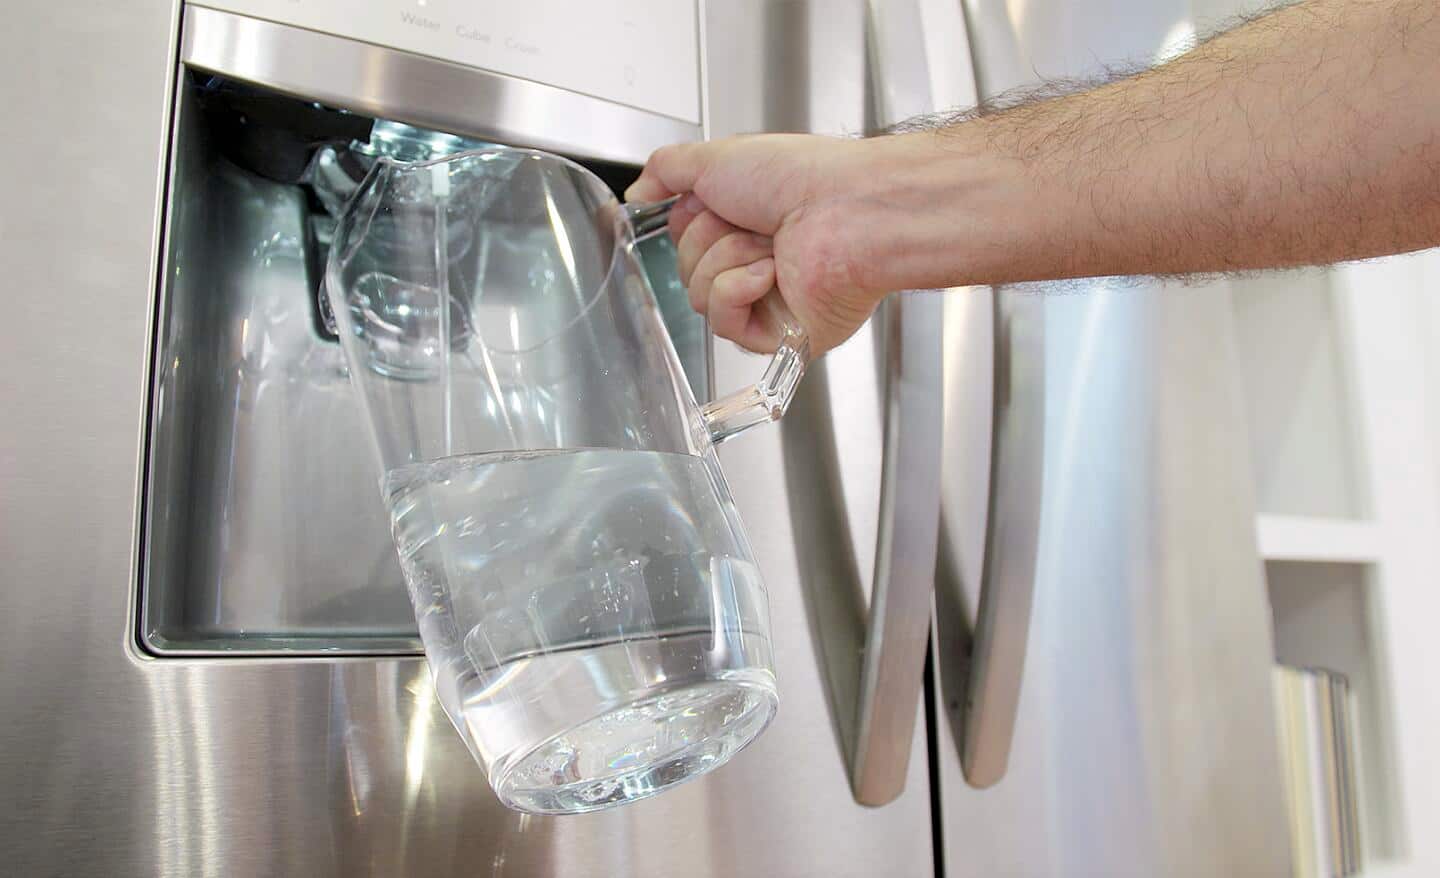 A person fills a pitcher with water from a refrigerator water dispenser.